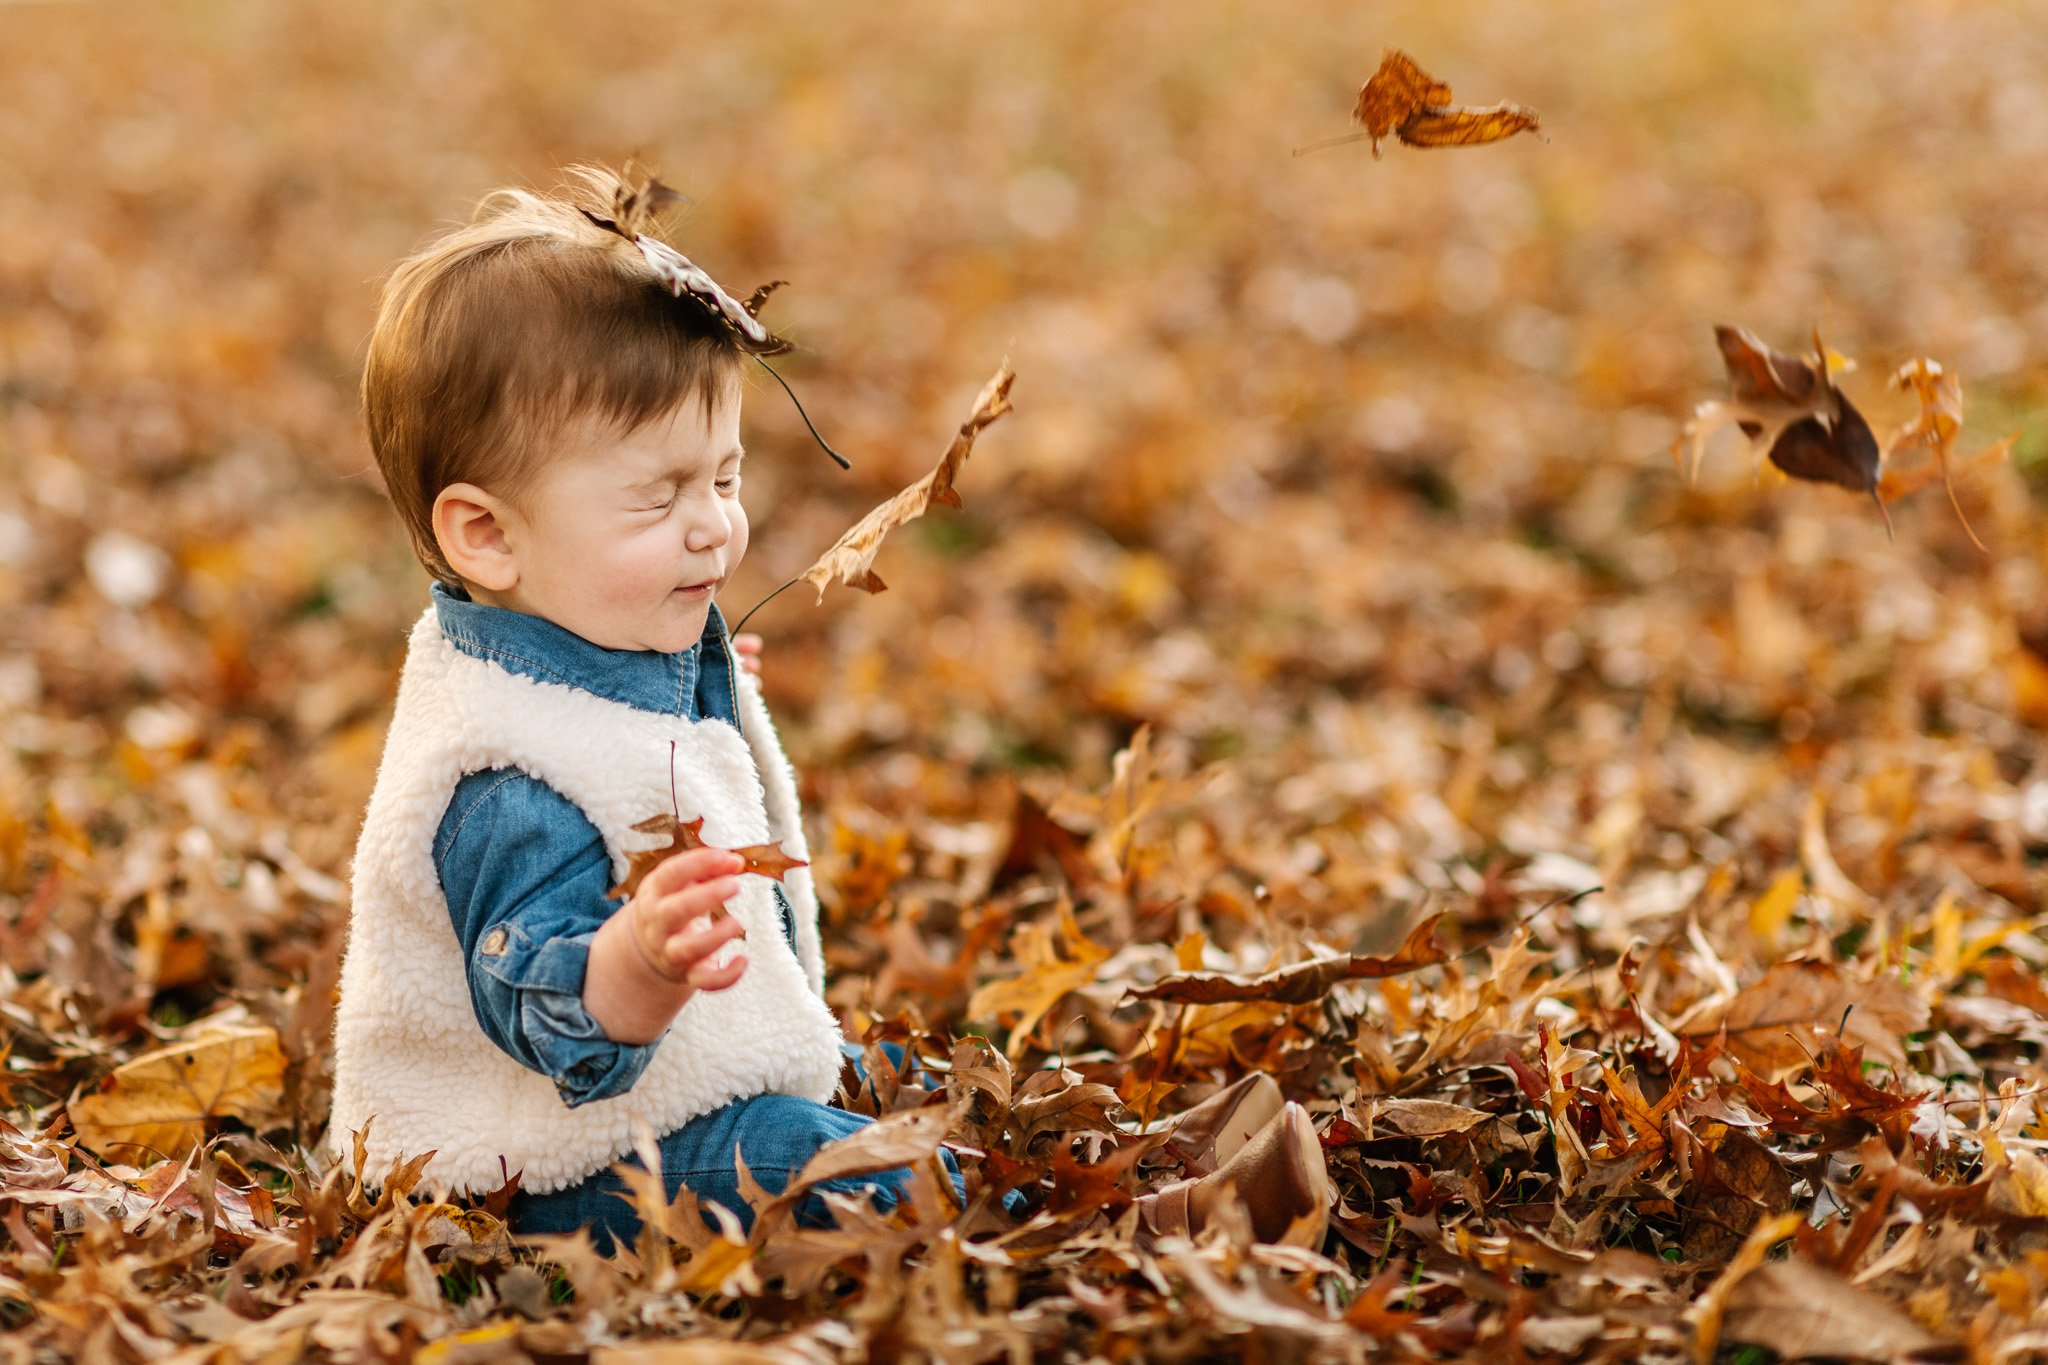  Fall family portrait of a baby girl throwing leaves by Nicole Hawkins Photography in New Jersey. fall portraits with leaves #NicoleHawkinsPhotography #NicoleHawkinsFamily #fallfamilyphotos #fallphotos #familyphotographerNJ #NJfallfamilypics 